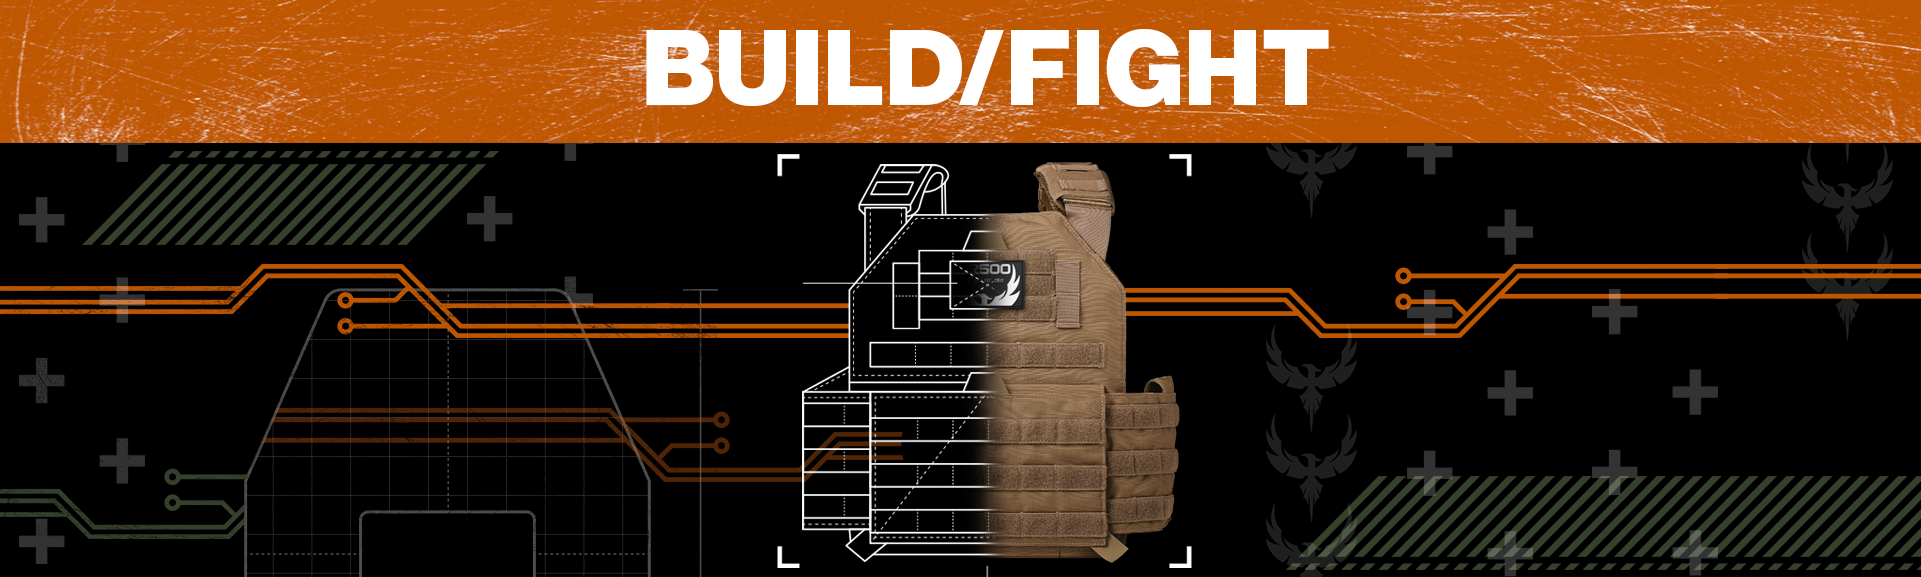 Build, Fight from AR500 Armor of the Armored Republic